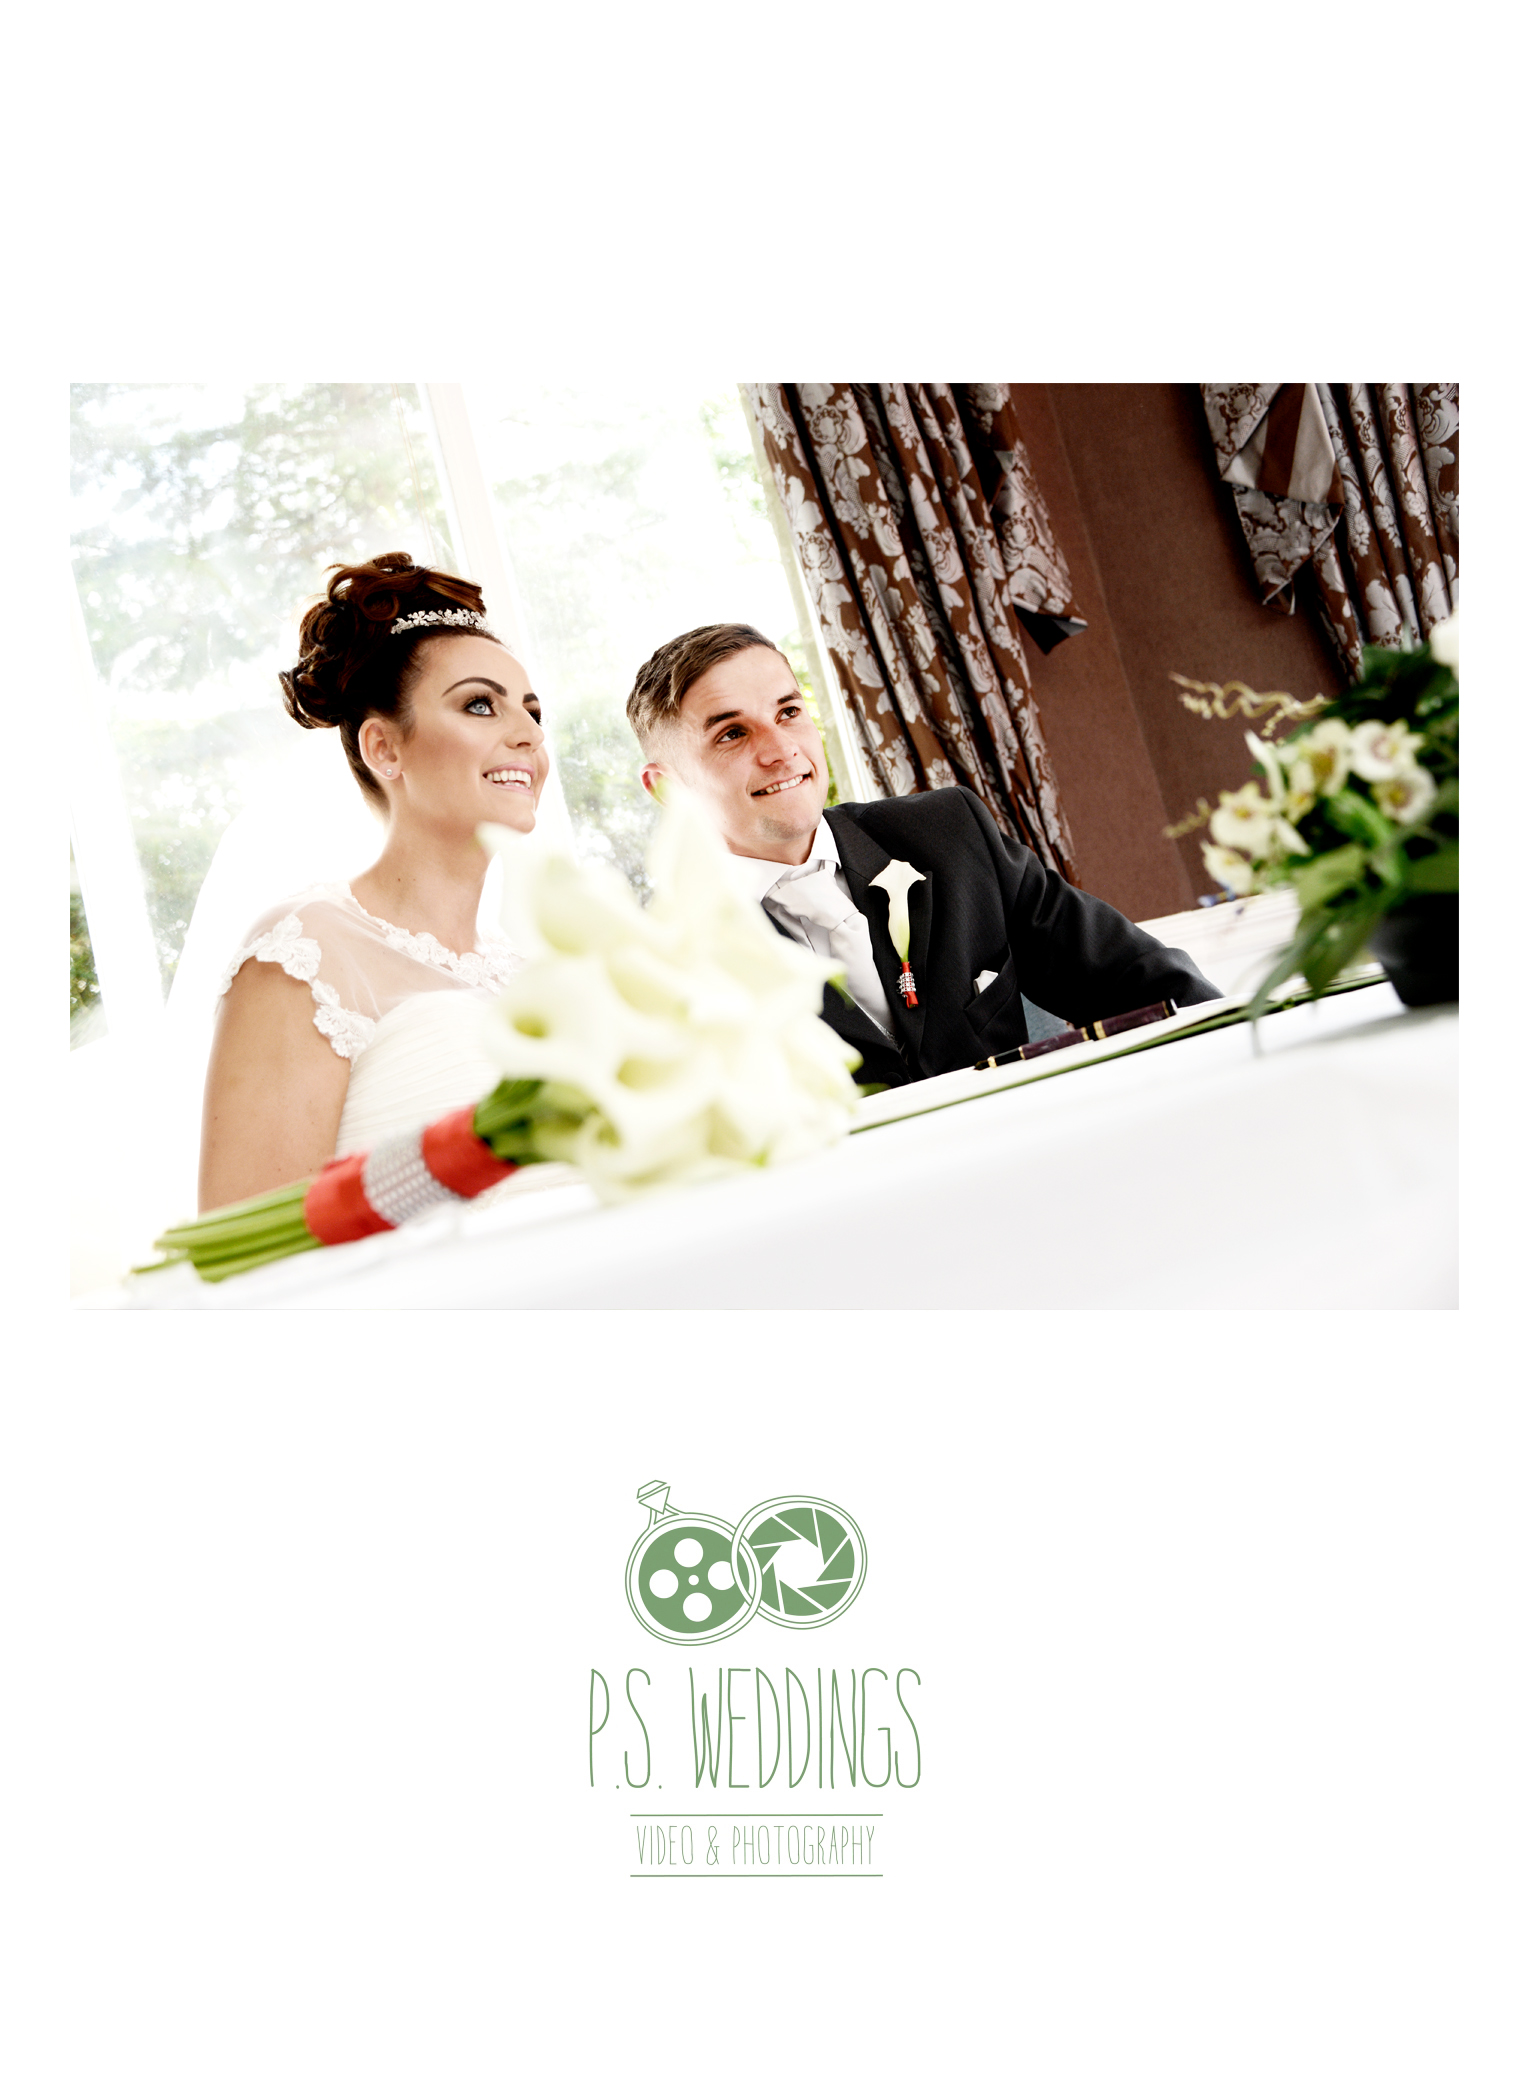 Clare and Chad: Hollin Hall Country Hotel, Bollington, Macclesfield. (C) PS Weddings UK.